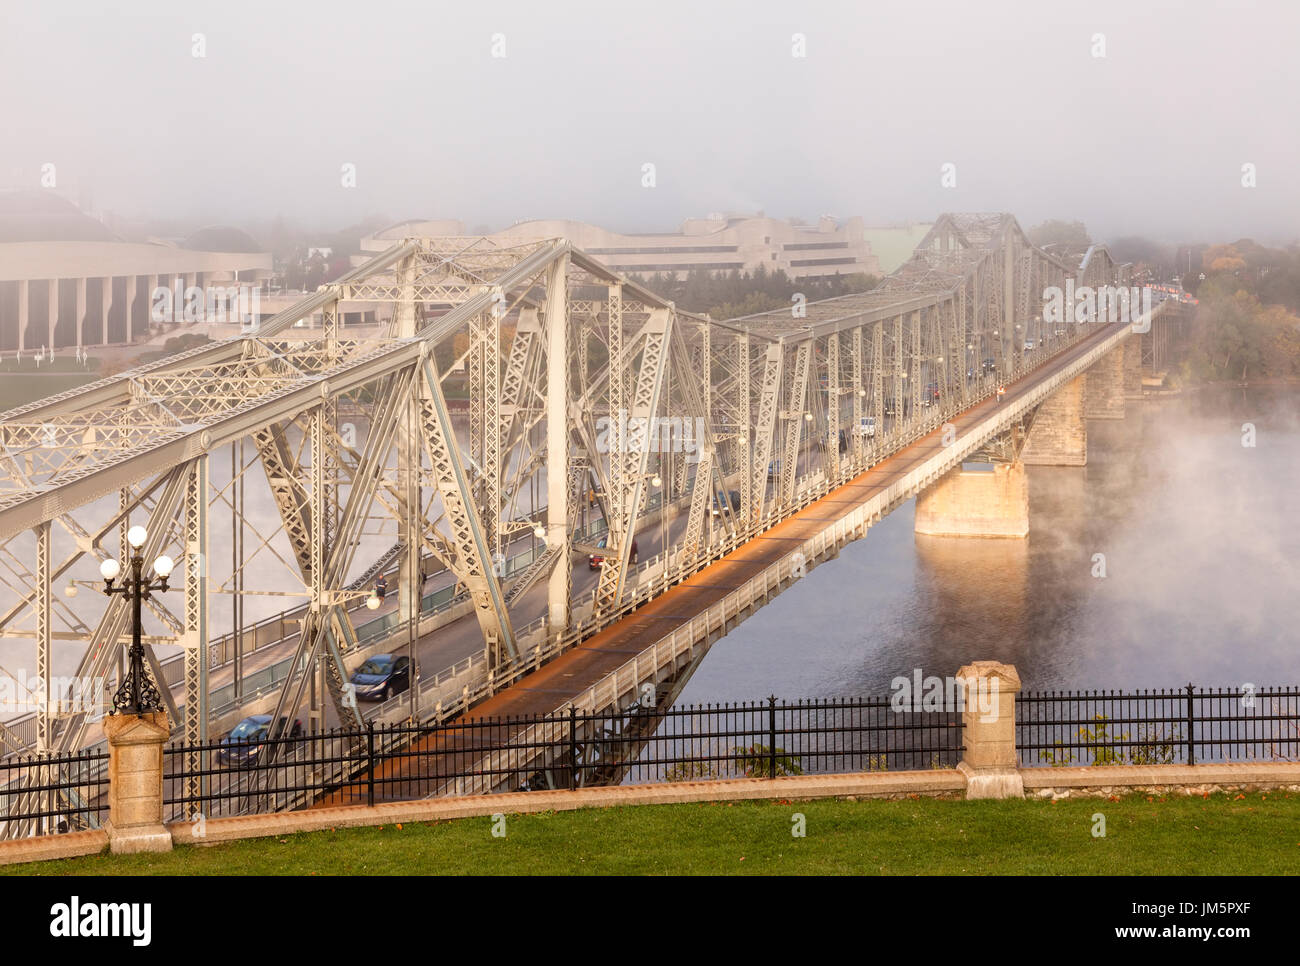 The Royal Alexandra Interprovincial Bridge is a steel truss cantilever bridge that spans the Ottawa River during a foggy morning in Ottawa, Ontario. Stock Photo